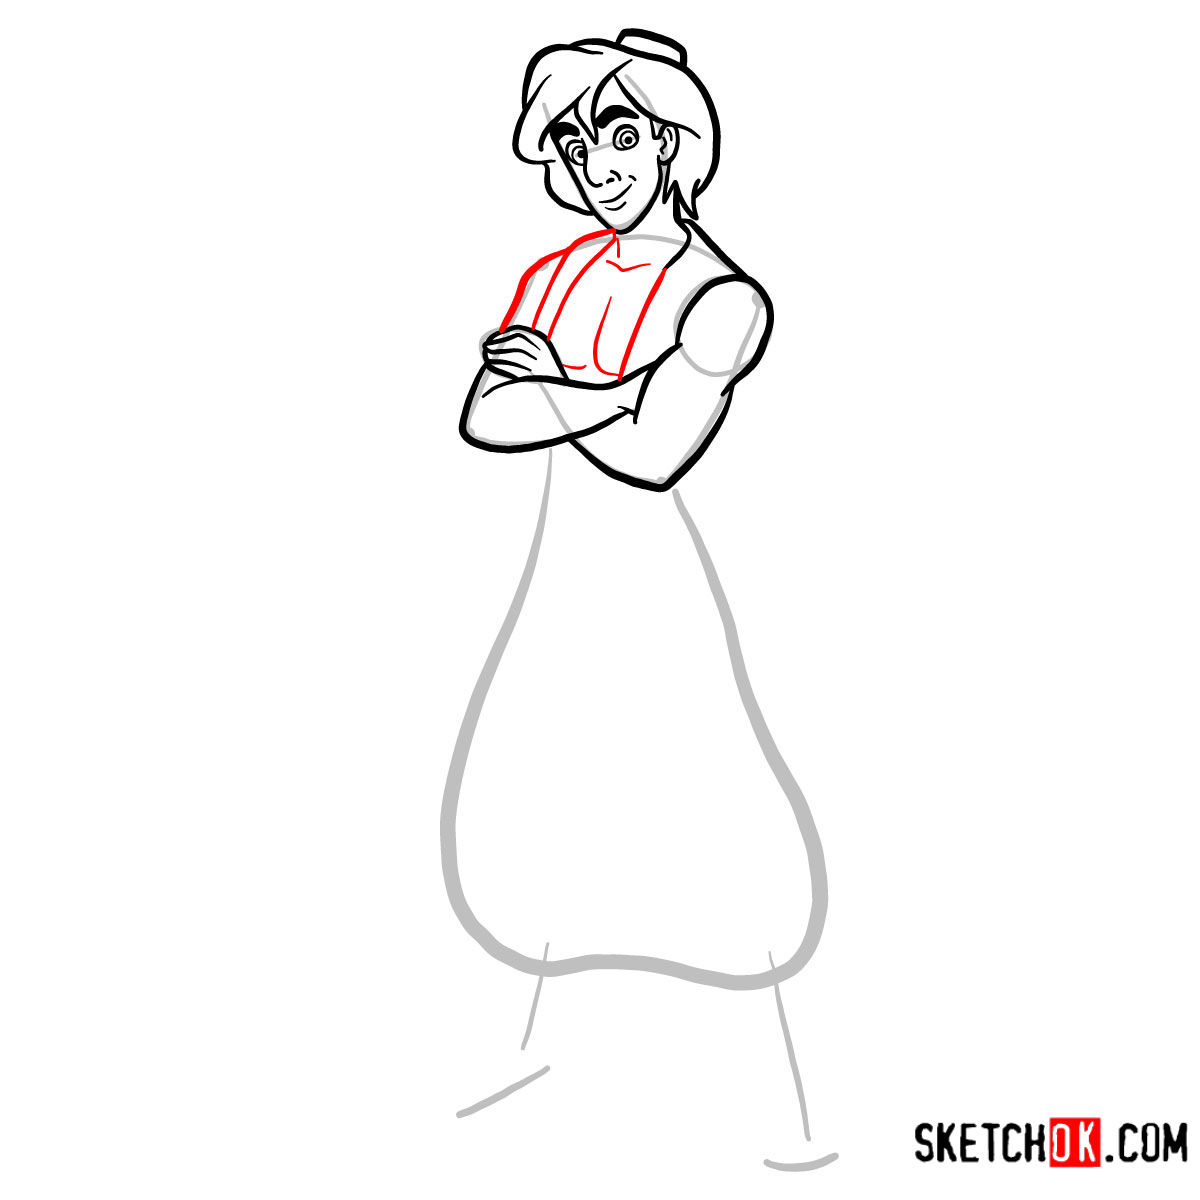 How to draw Aladdin from Disney's animated series - step 07